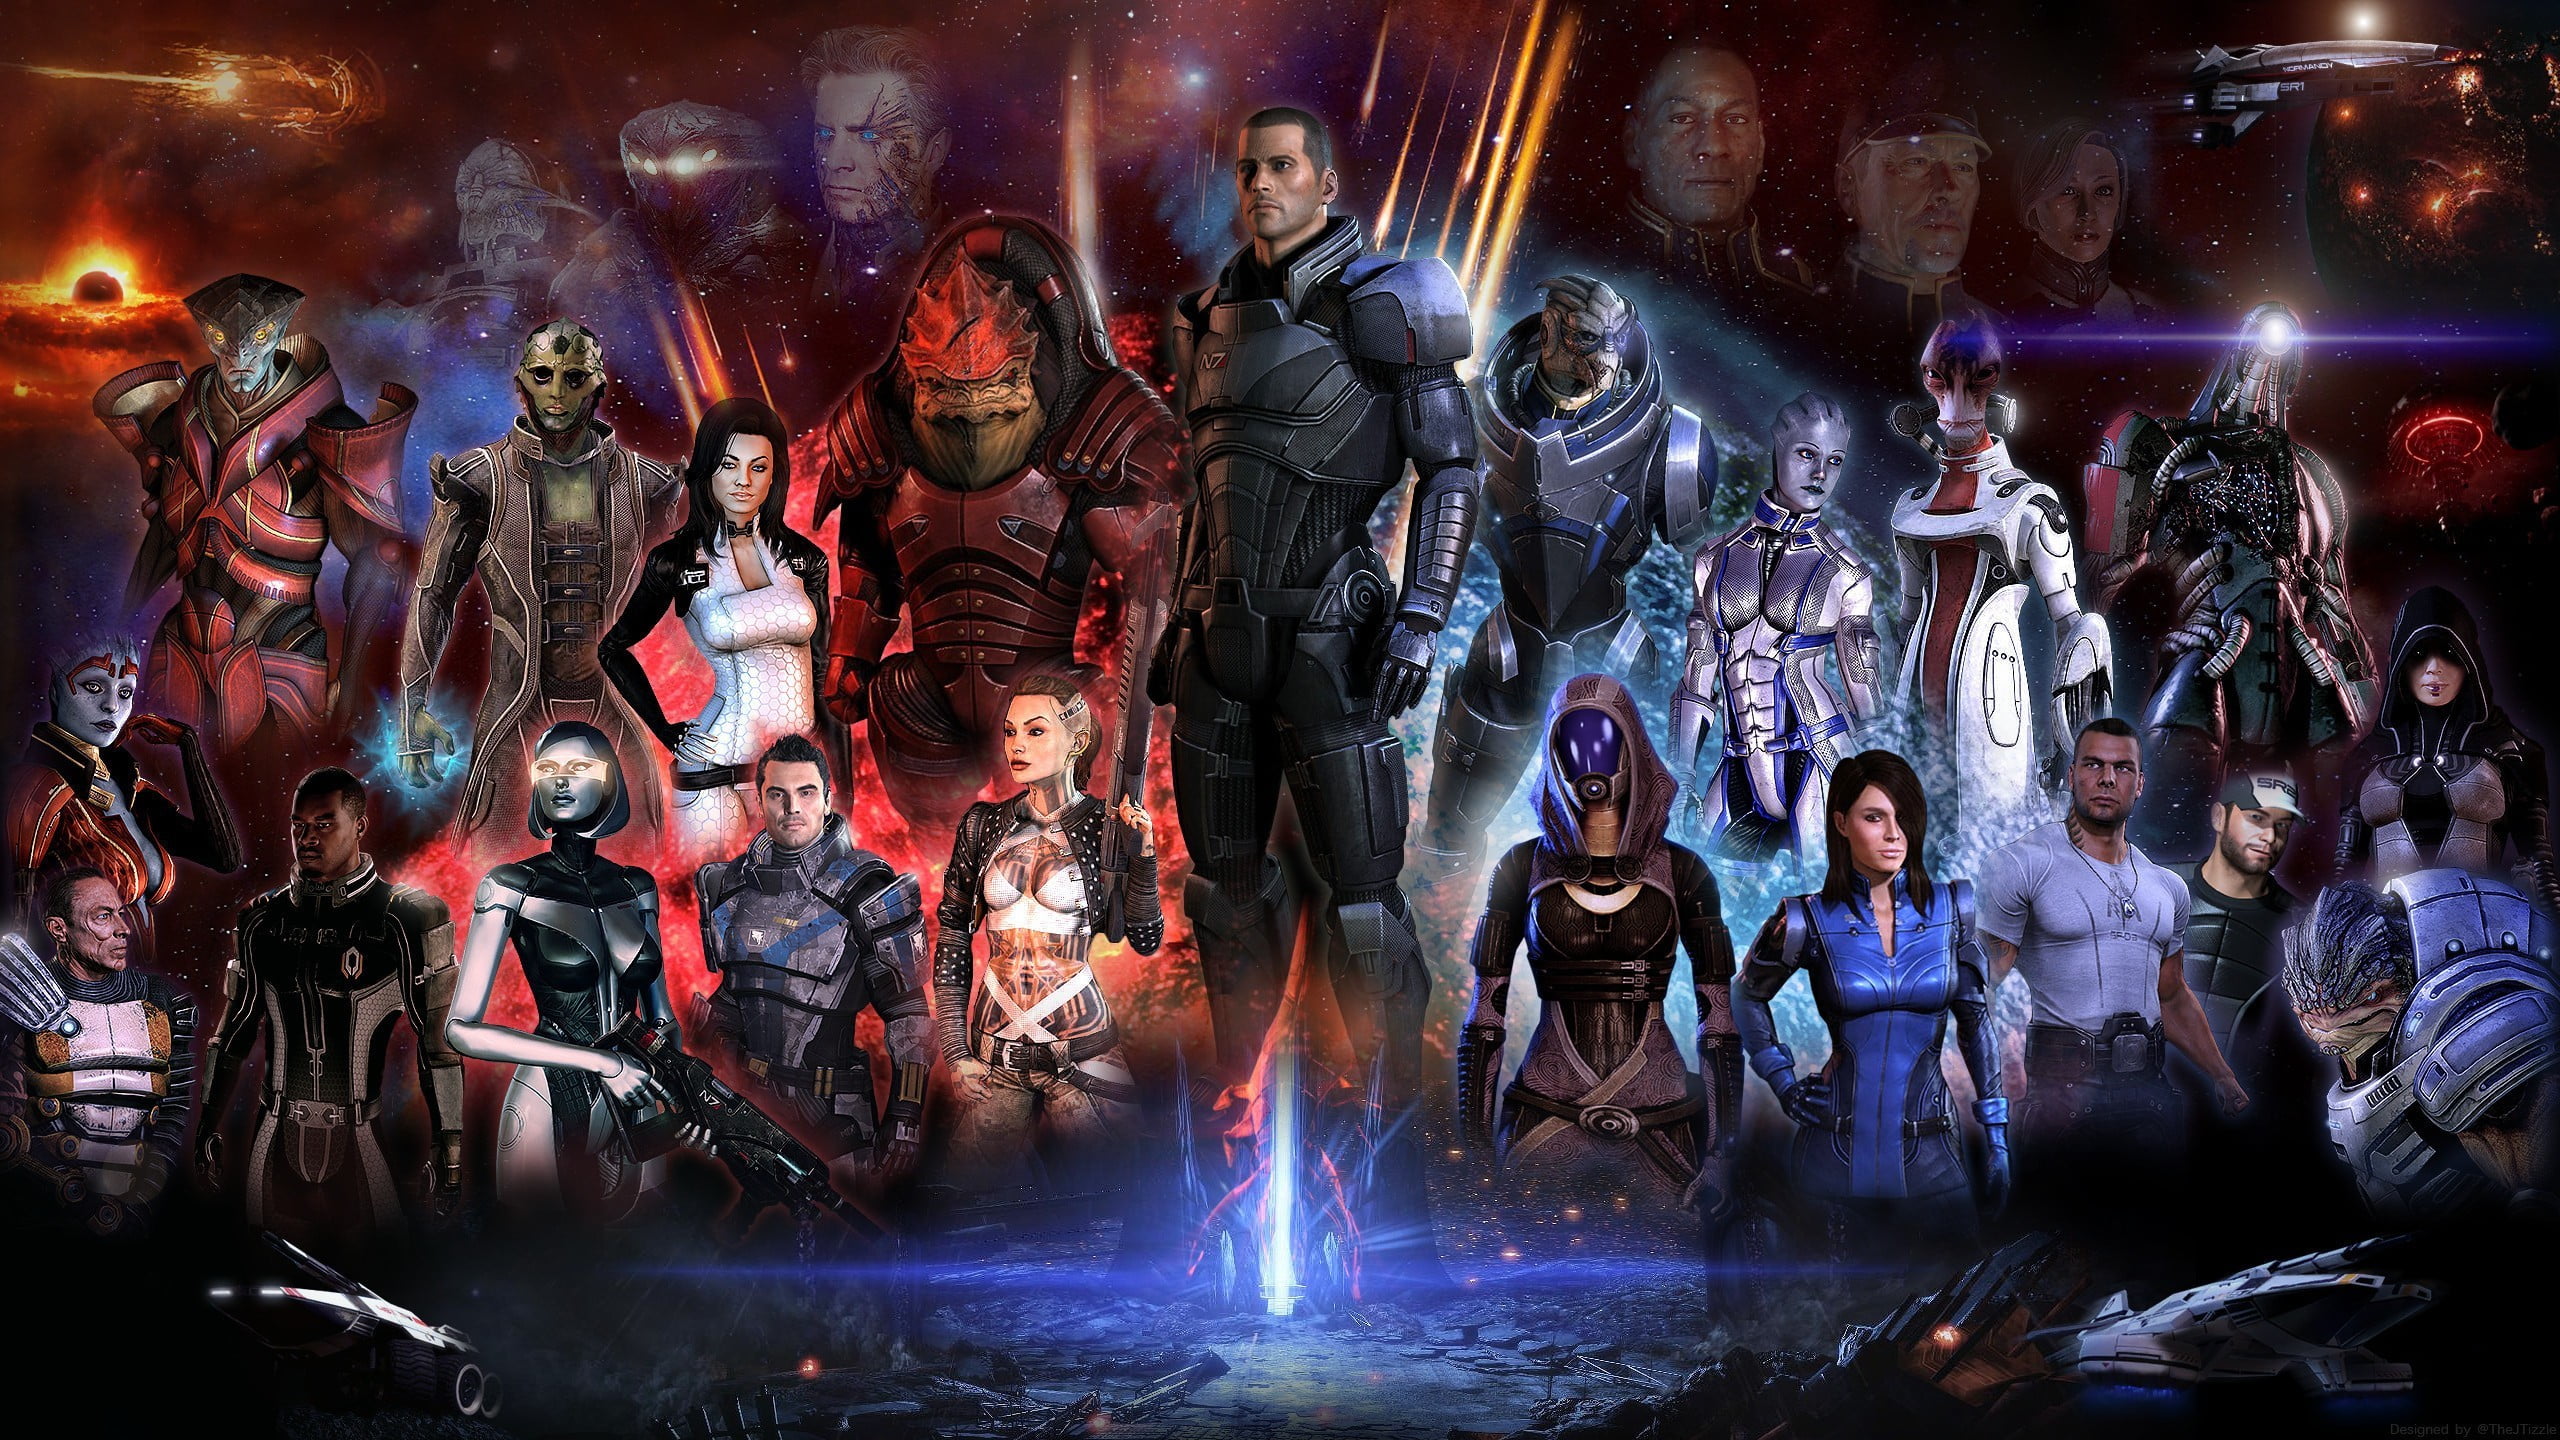 Mass Effect 3, video games, crowd, large group of people, real people